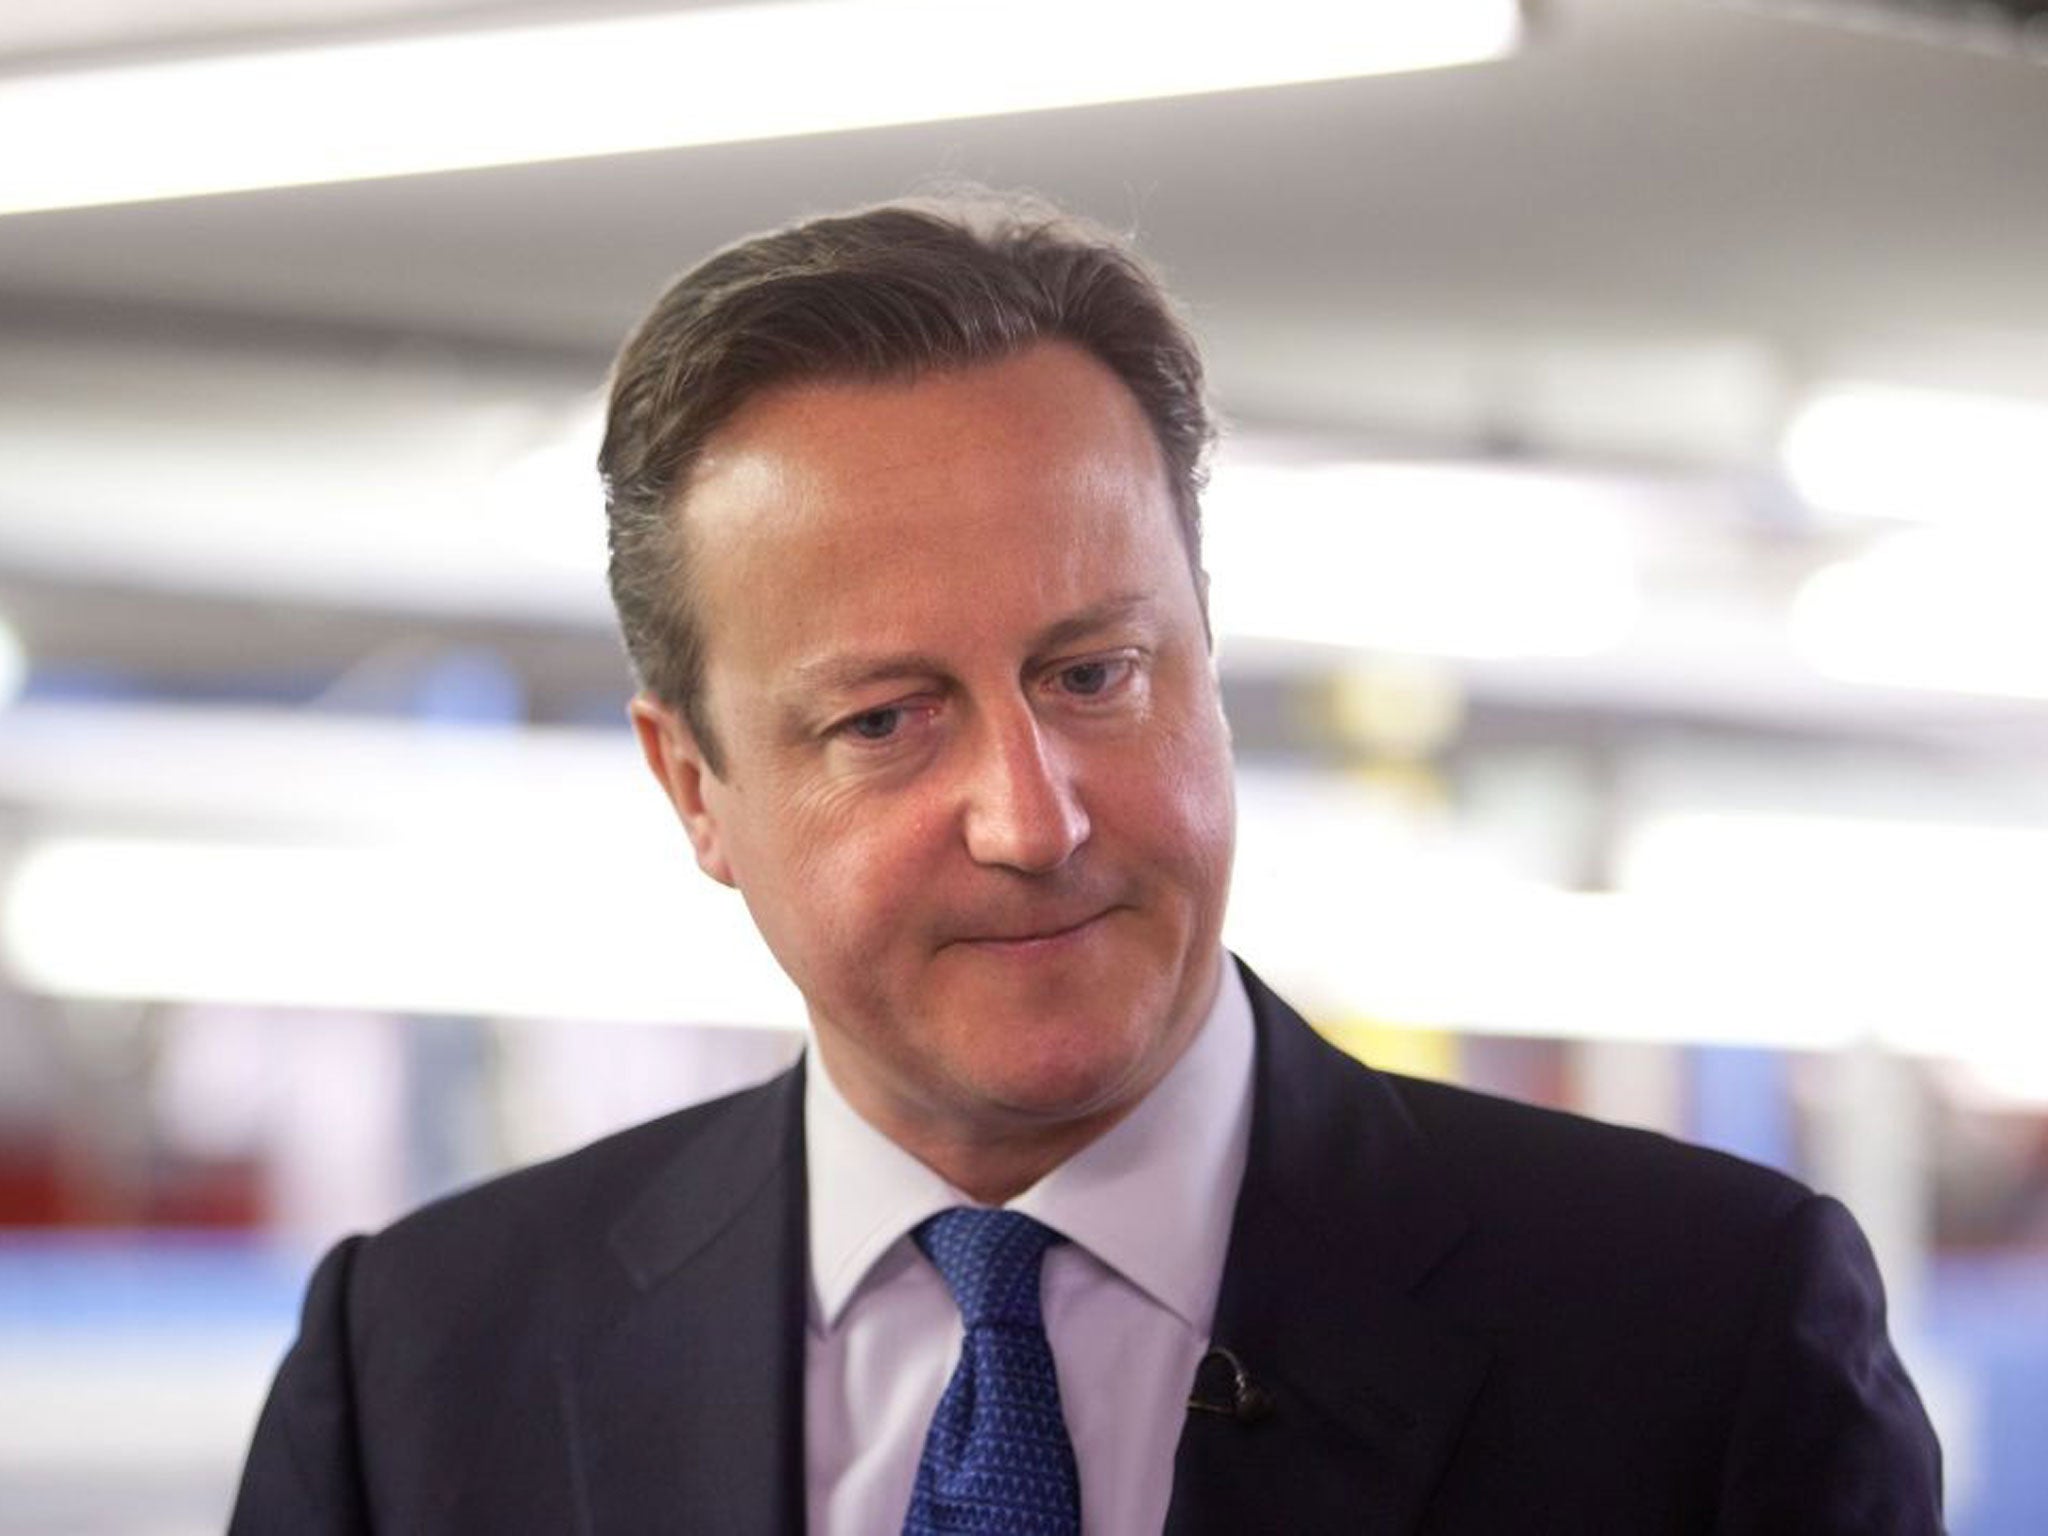 David Cameron was 'disappointed' by the vote